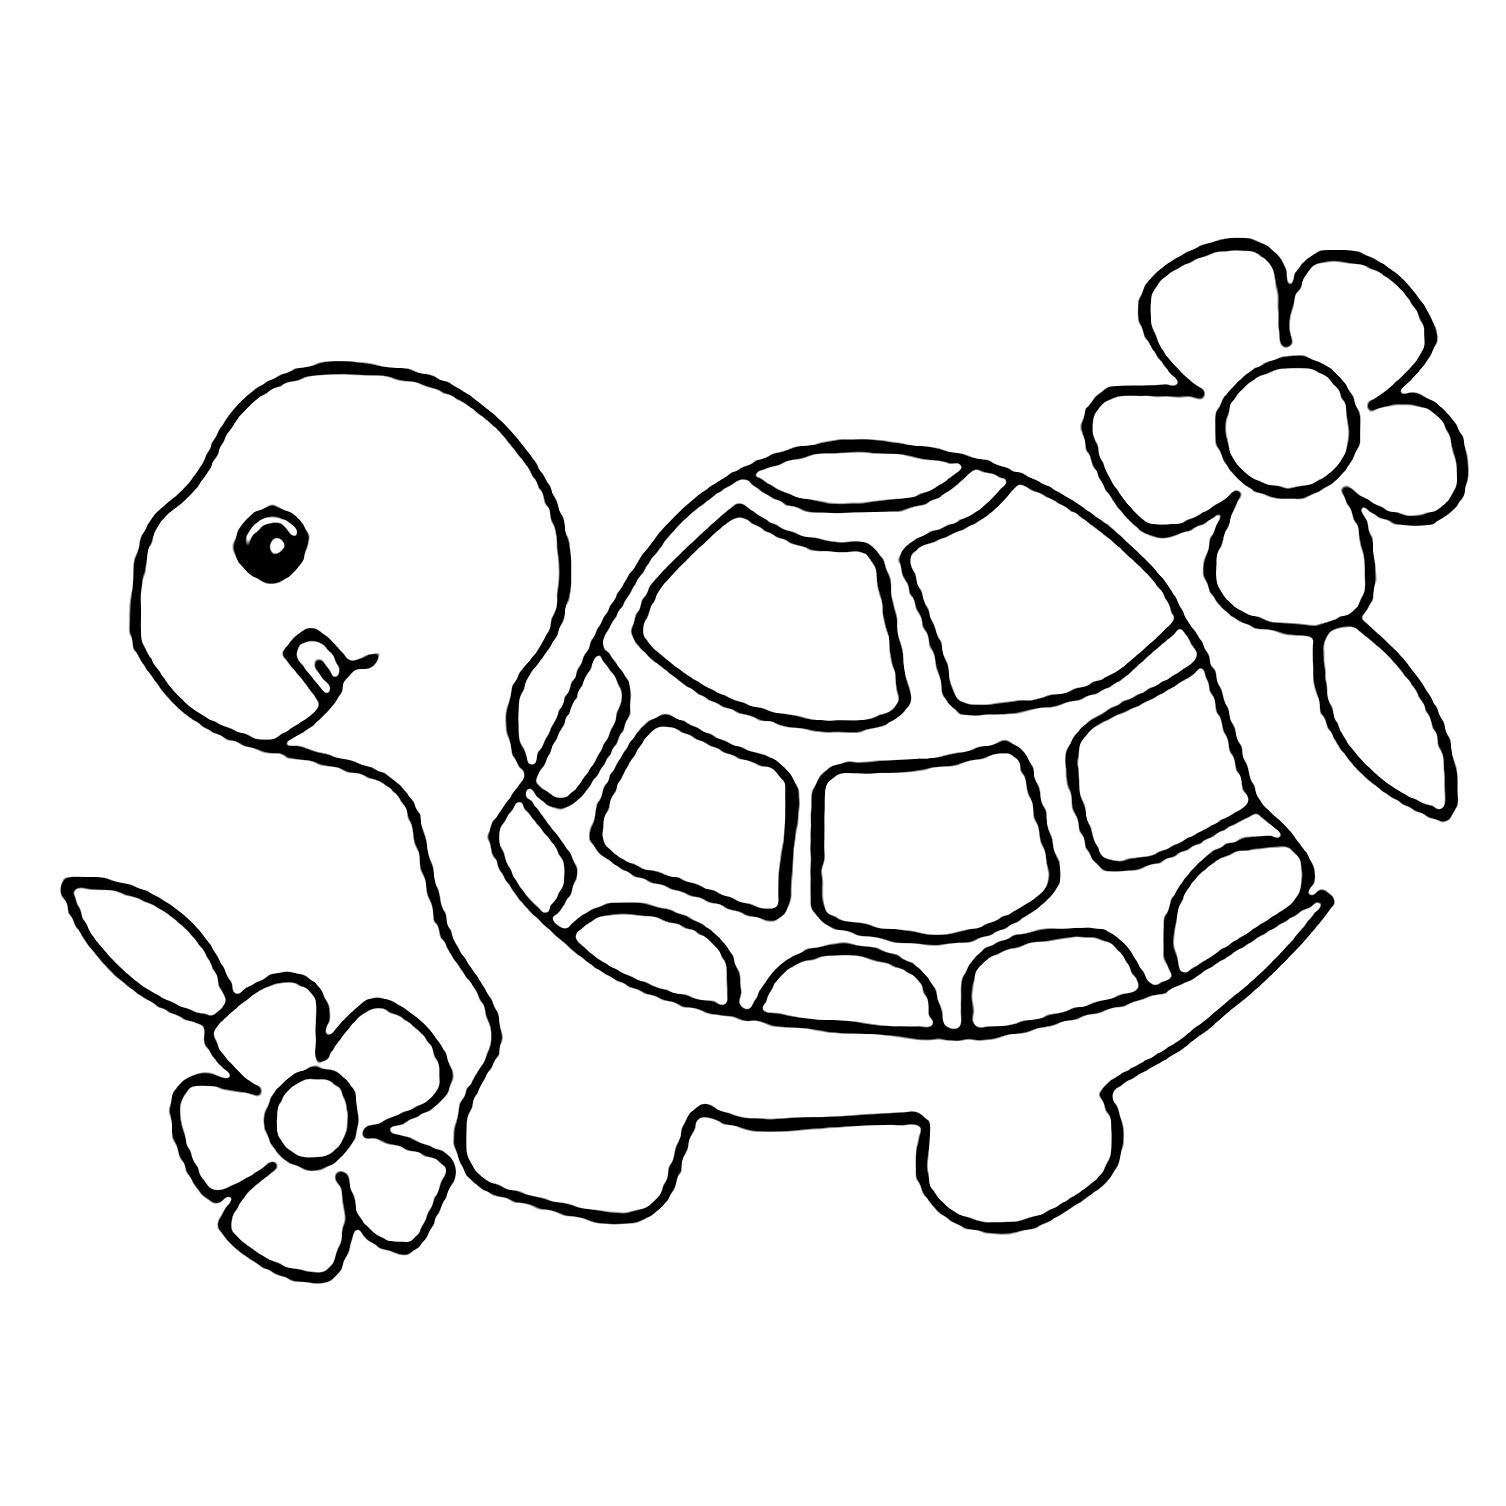 Turtle Coloring Pages For Kids
 Turtles to for free Turtles Kids Coloring Pages